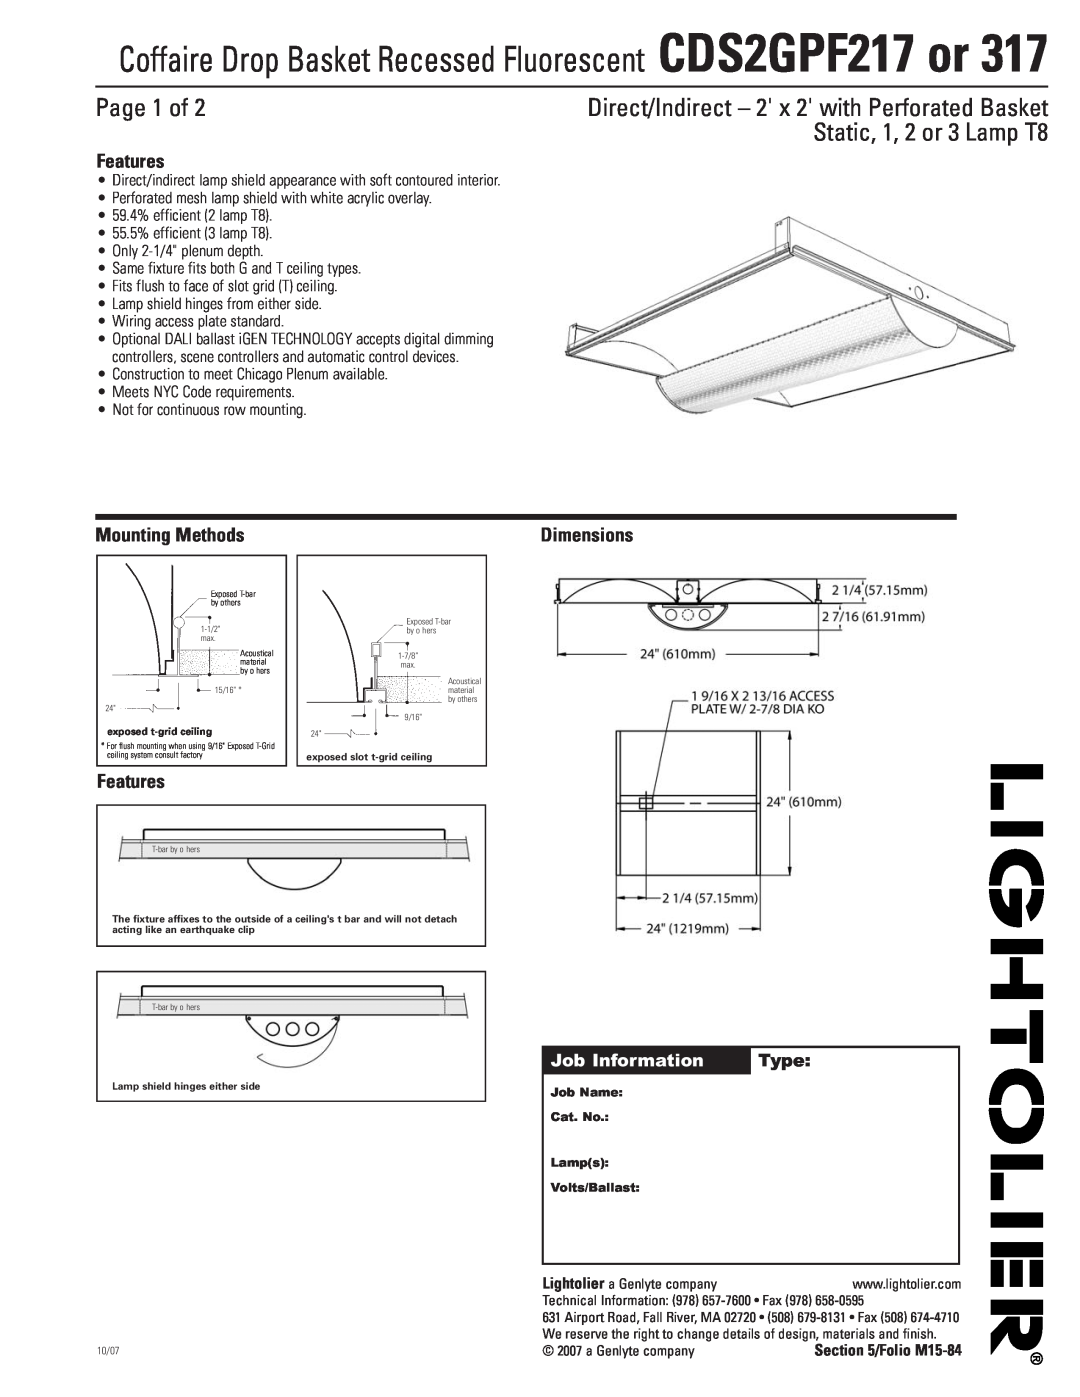 Lightolier CDS2GPF217, CDS2GPF317 dimensions Page 1 of, Features, Mounting Methods, Job Information, Type, Dimensions 